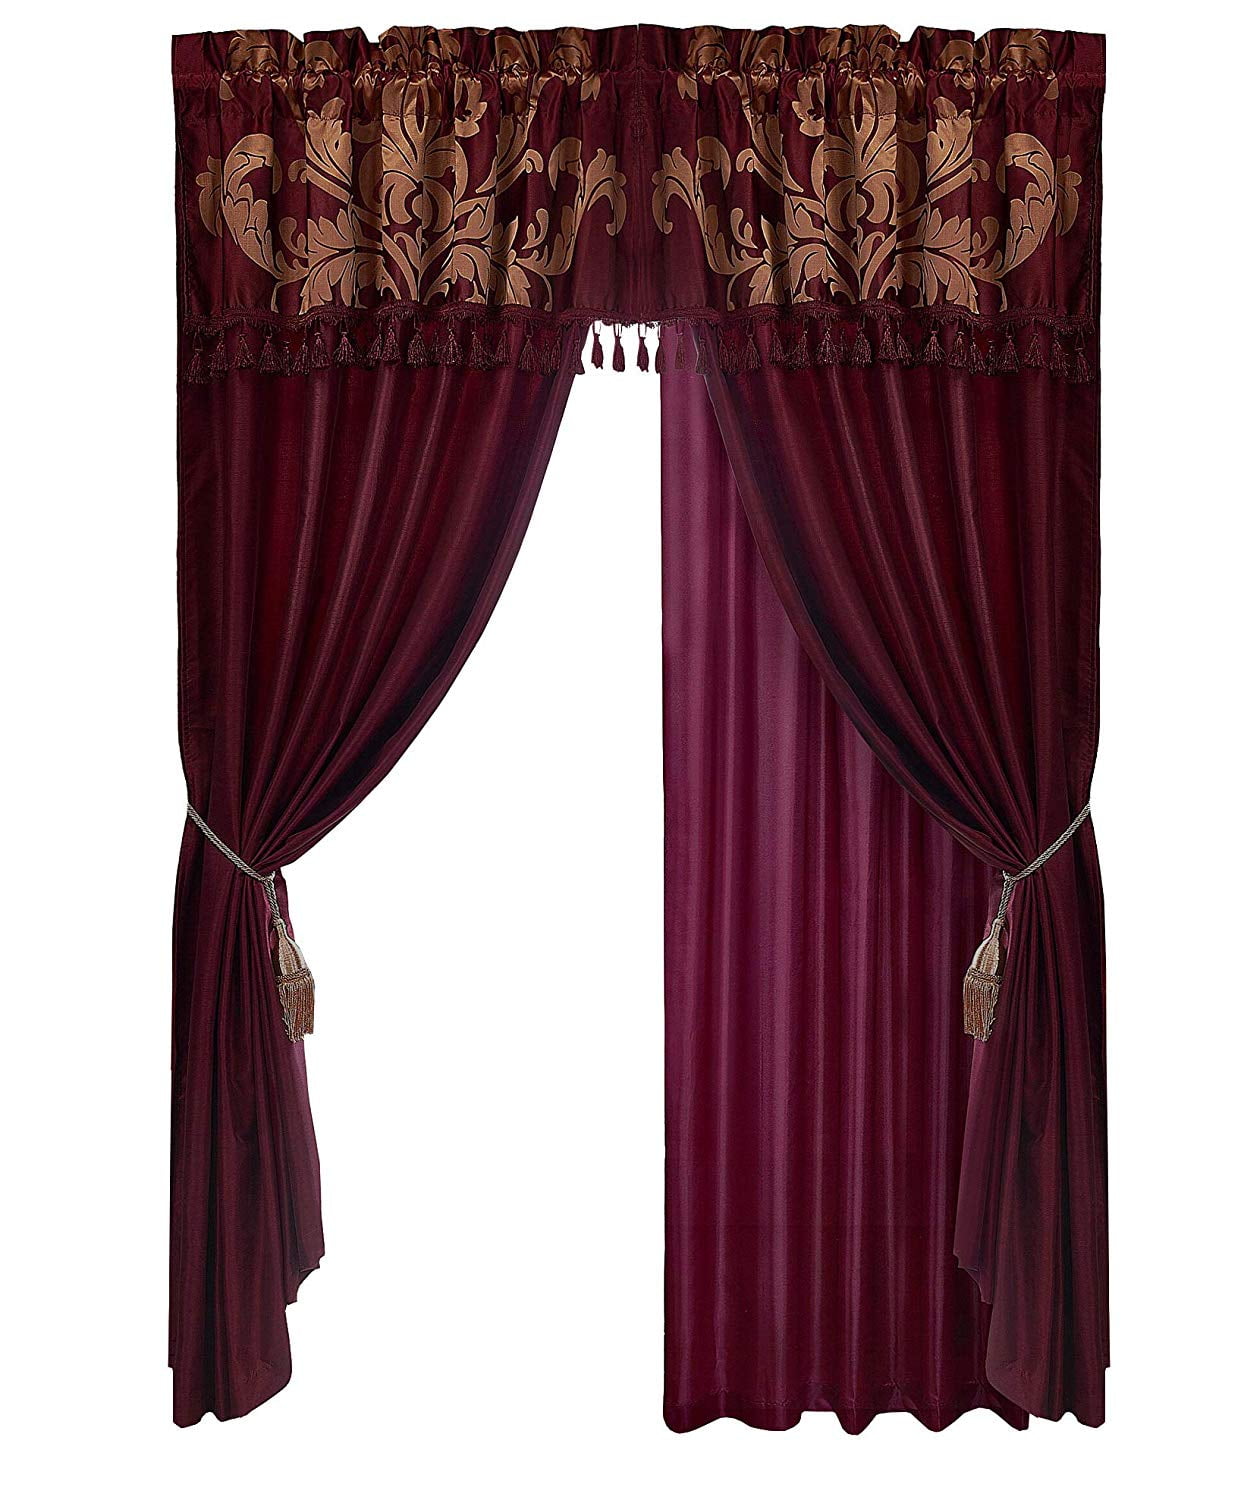 Details about   4-Pc Quilted Floral Embroidery Curtain Set Burgundy Brown Silver Valance Drape 